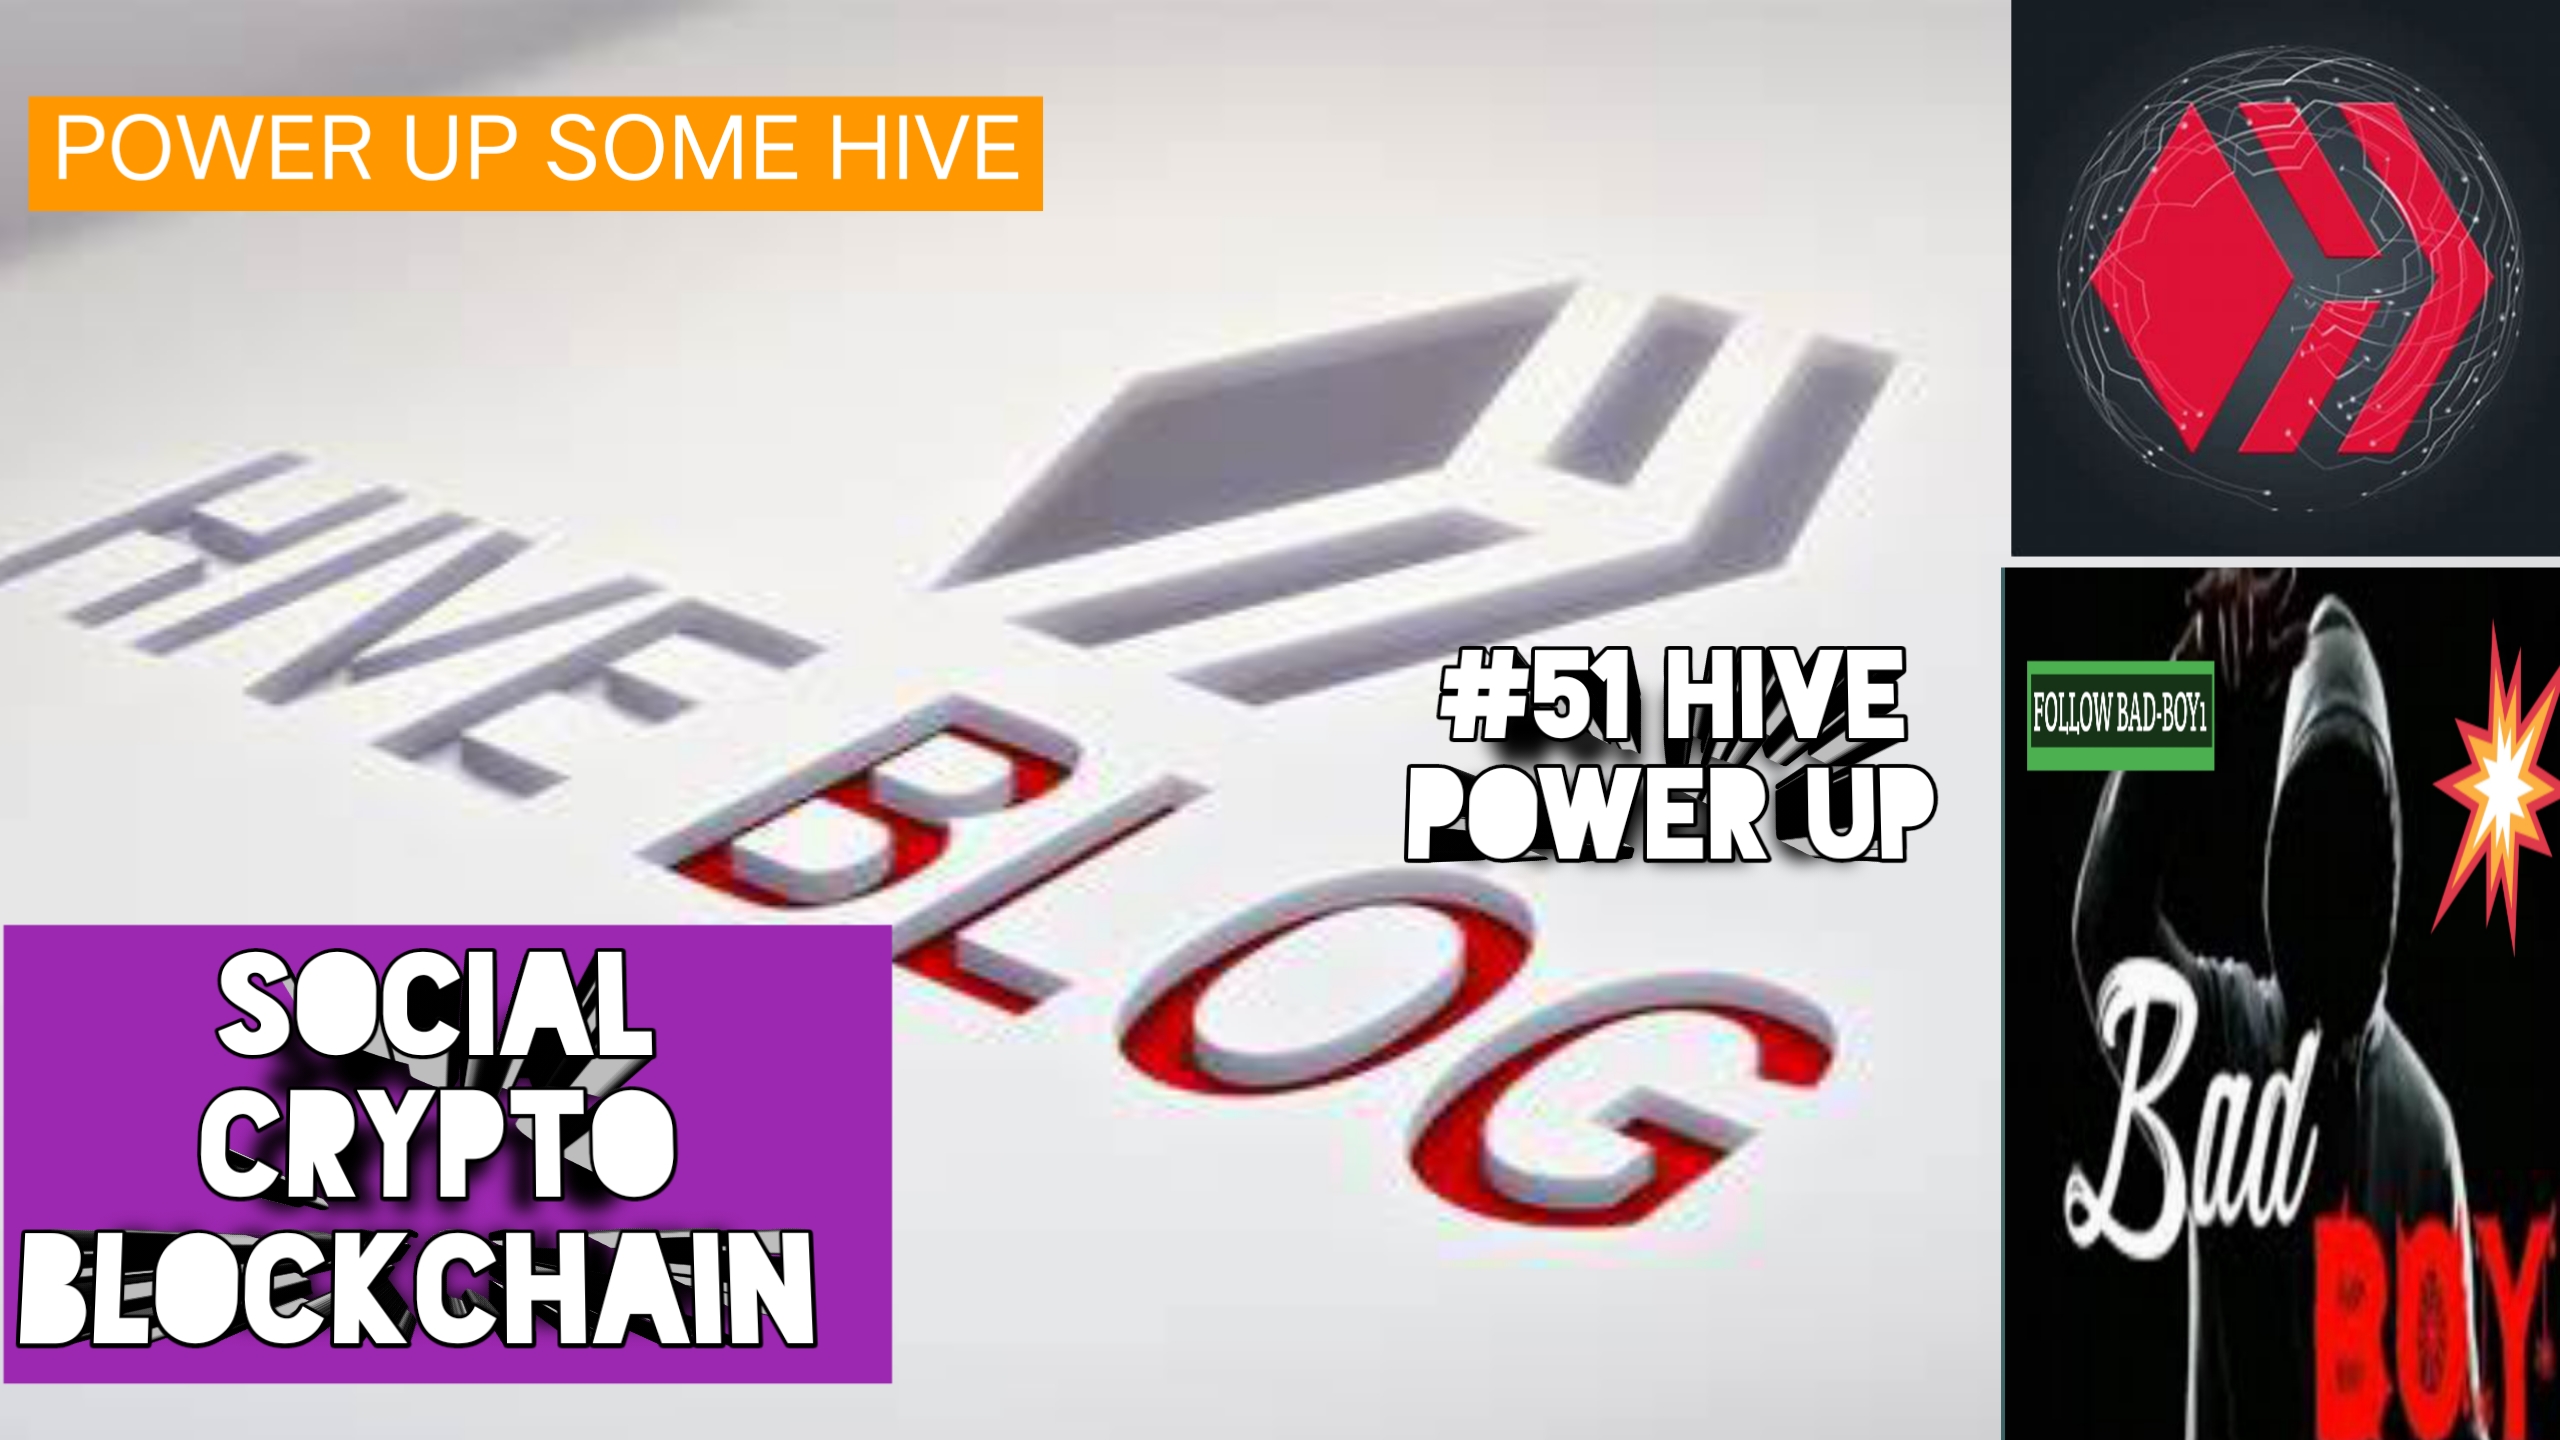 @bad-boy1/fast-hive-power-up-new-journey-on-hive-blockchain